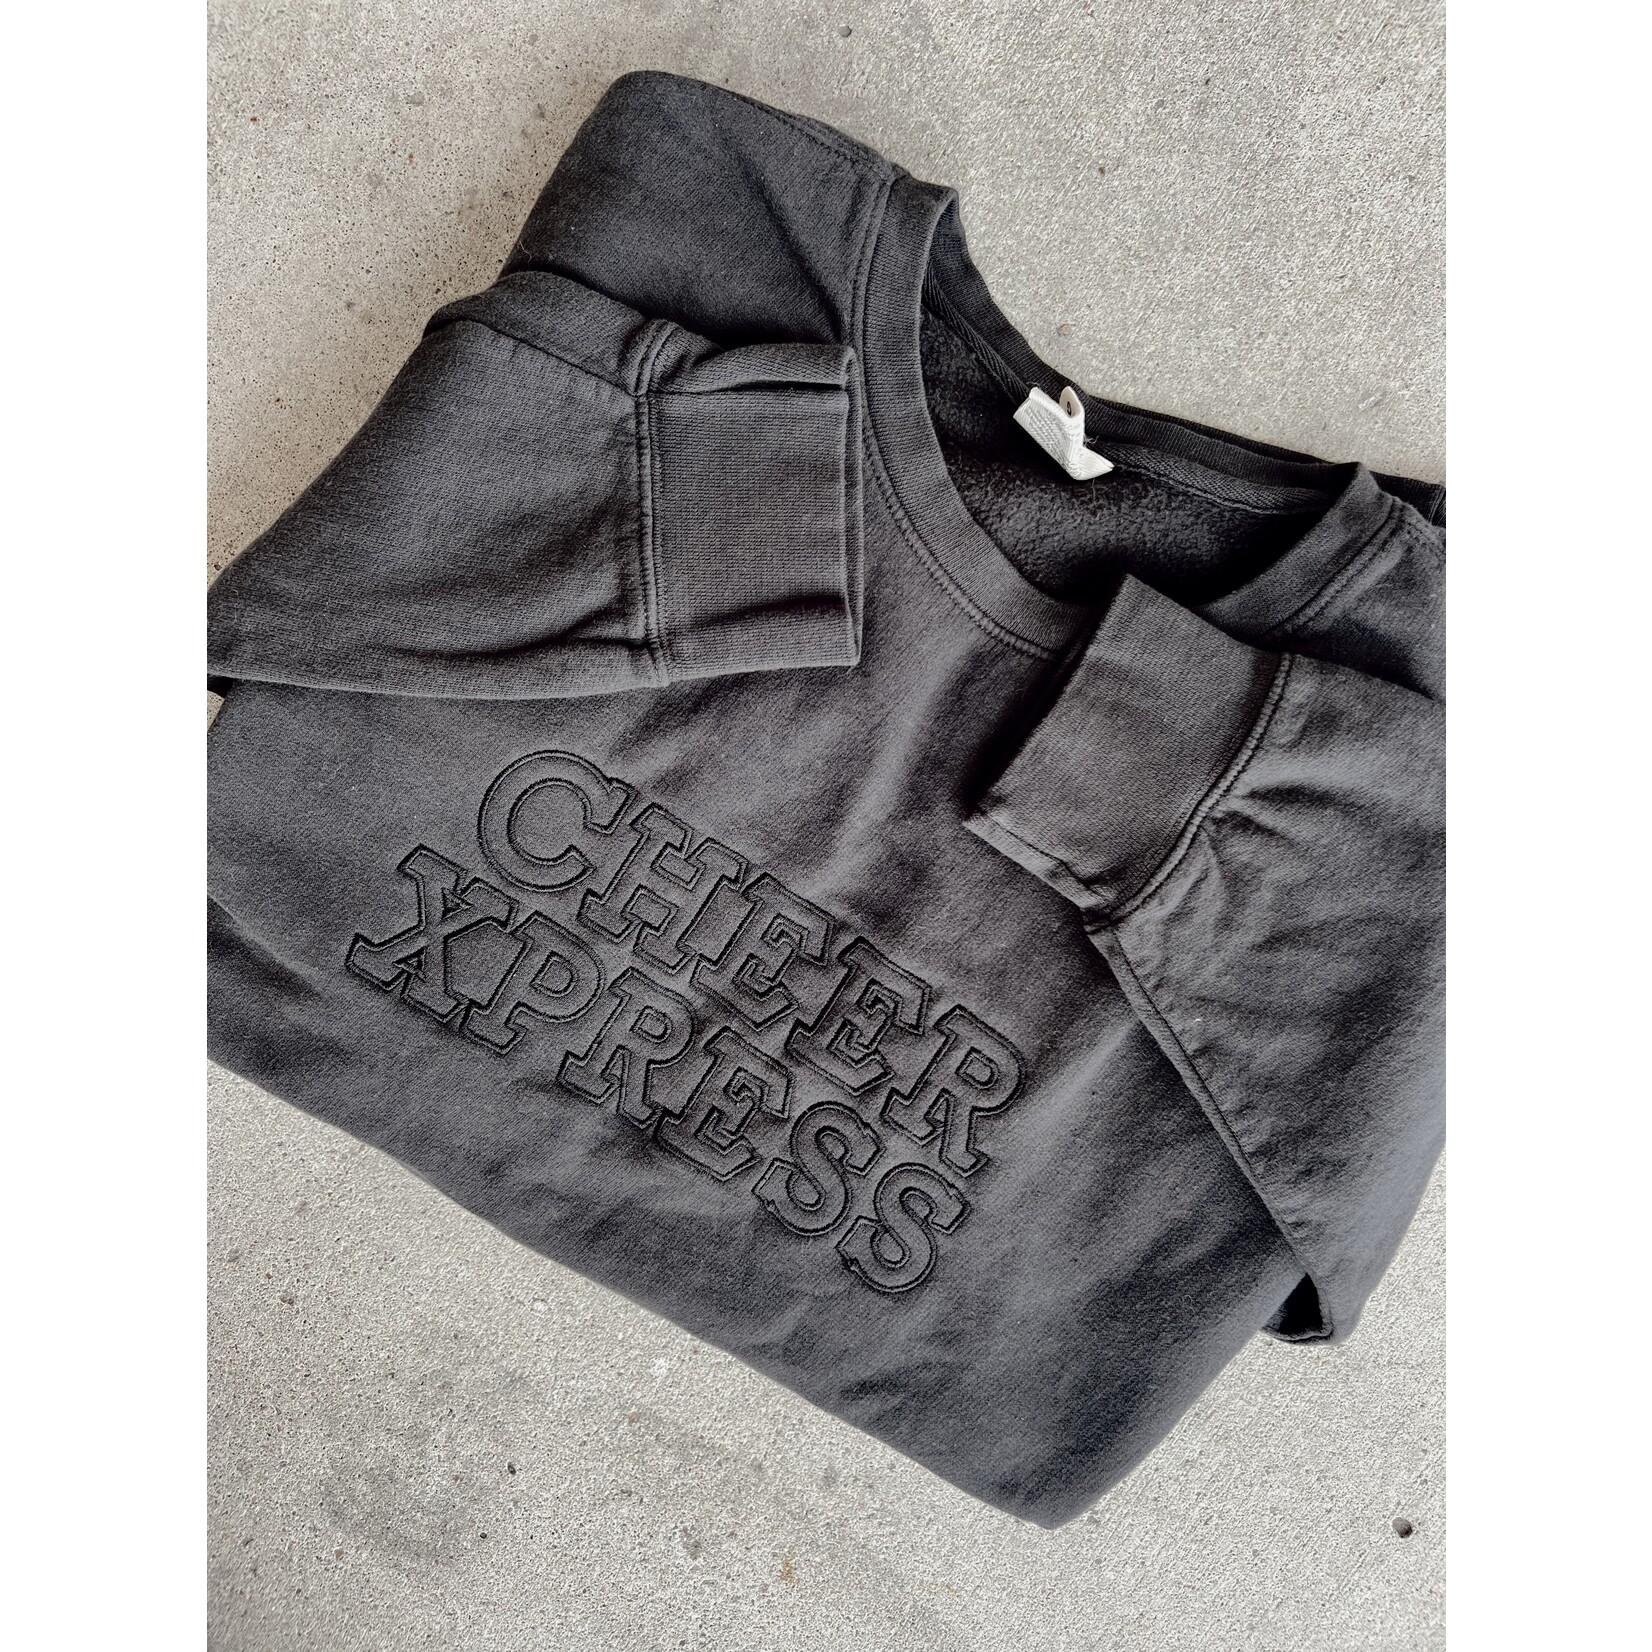 comfort colors Cheer Xpress Embroidered Crew